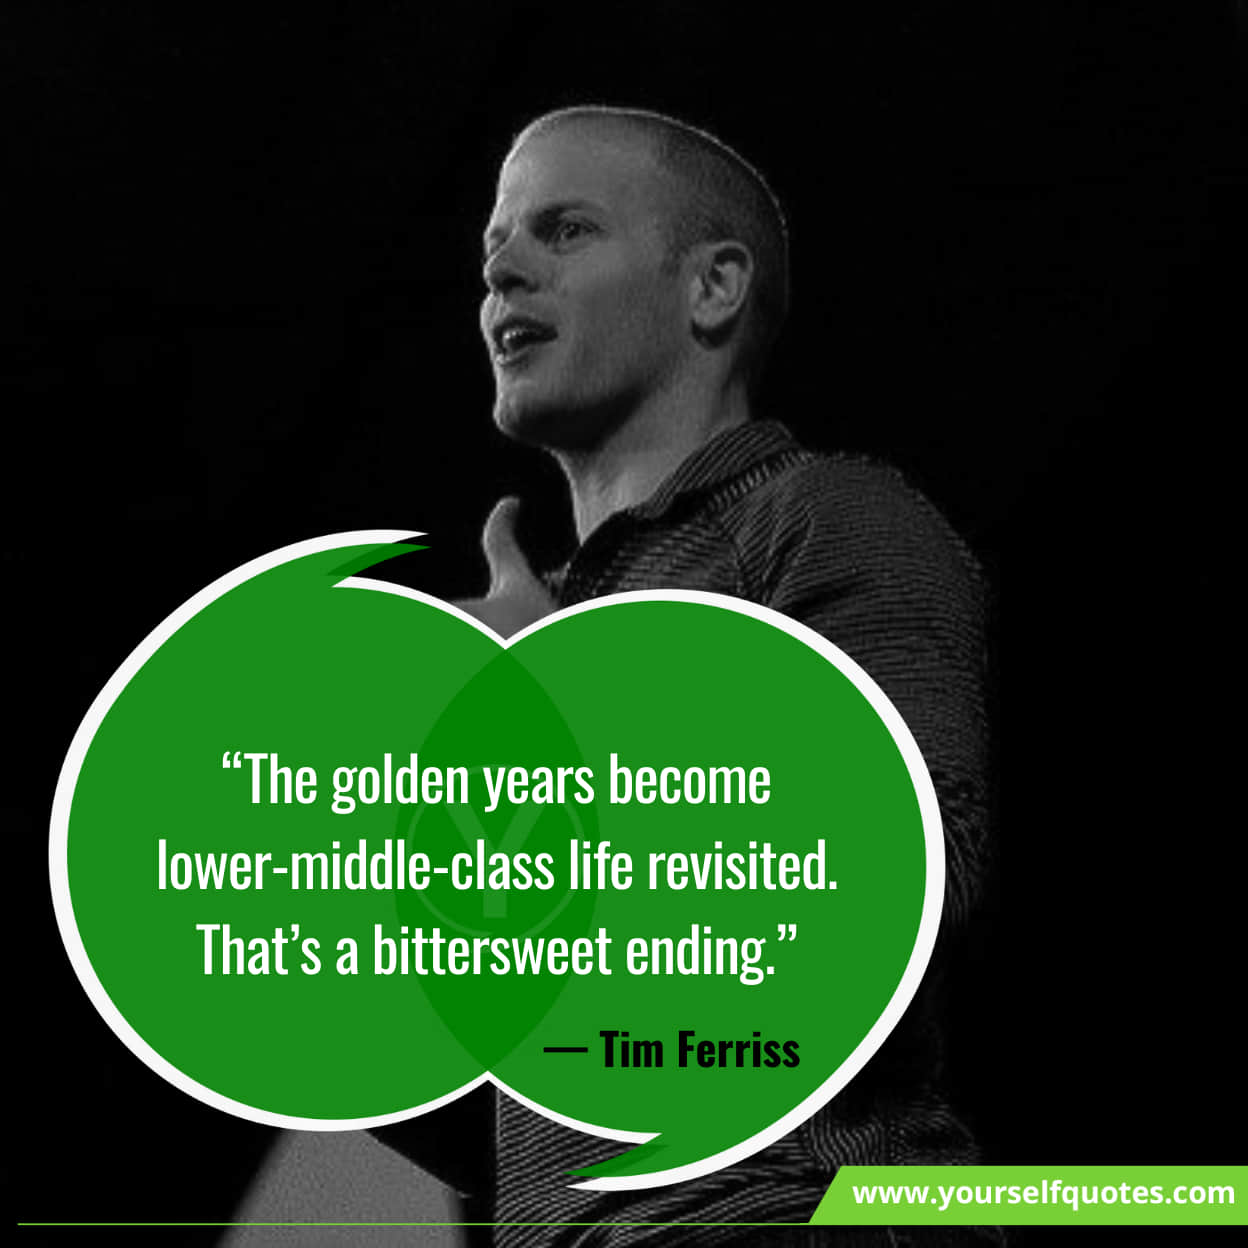 Tim Ferriss Quotes For Life